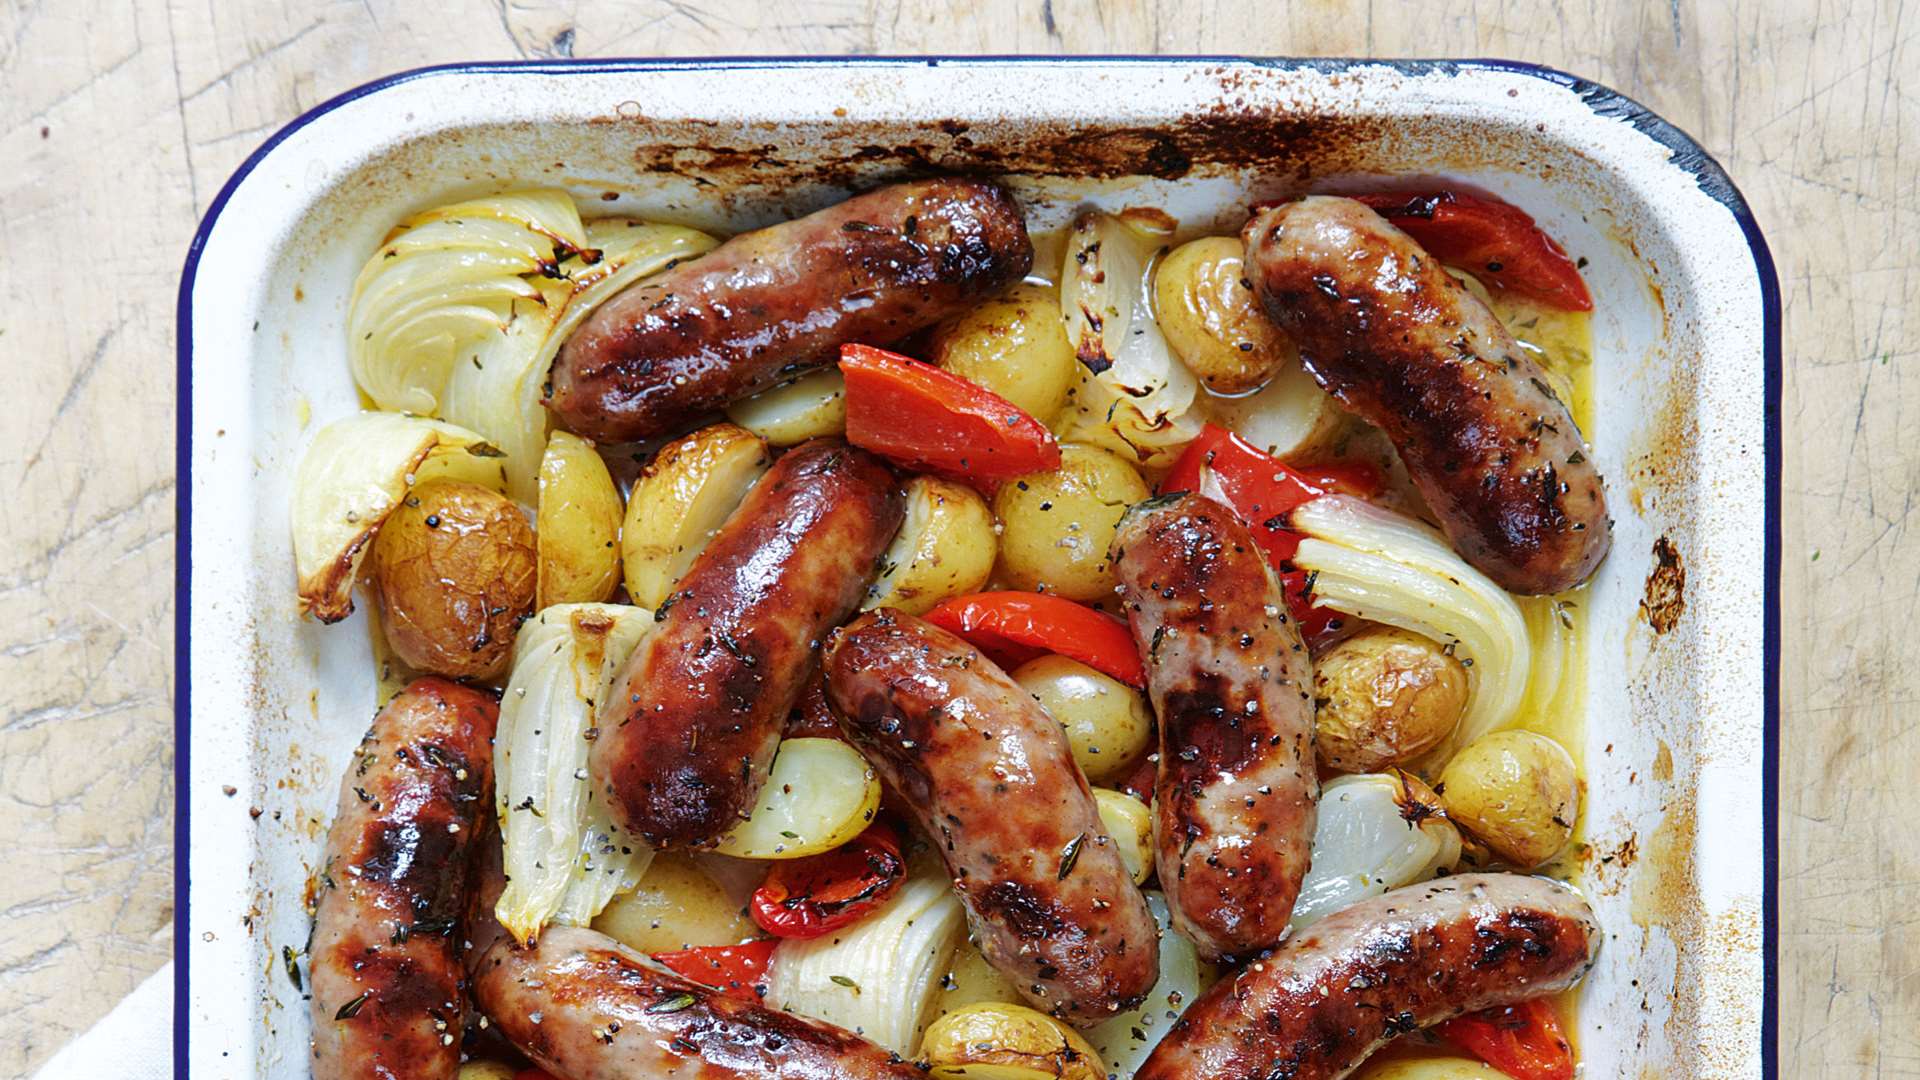 Mary Berry's Roasted Sausage and Potato Supper